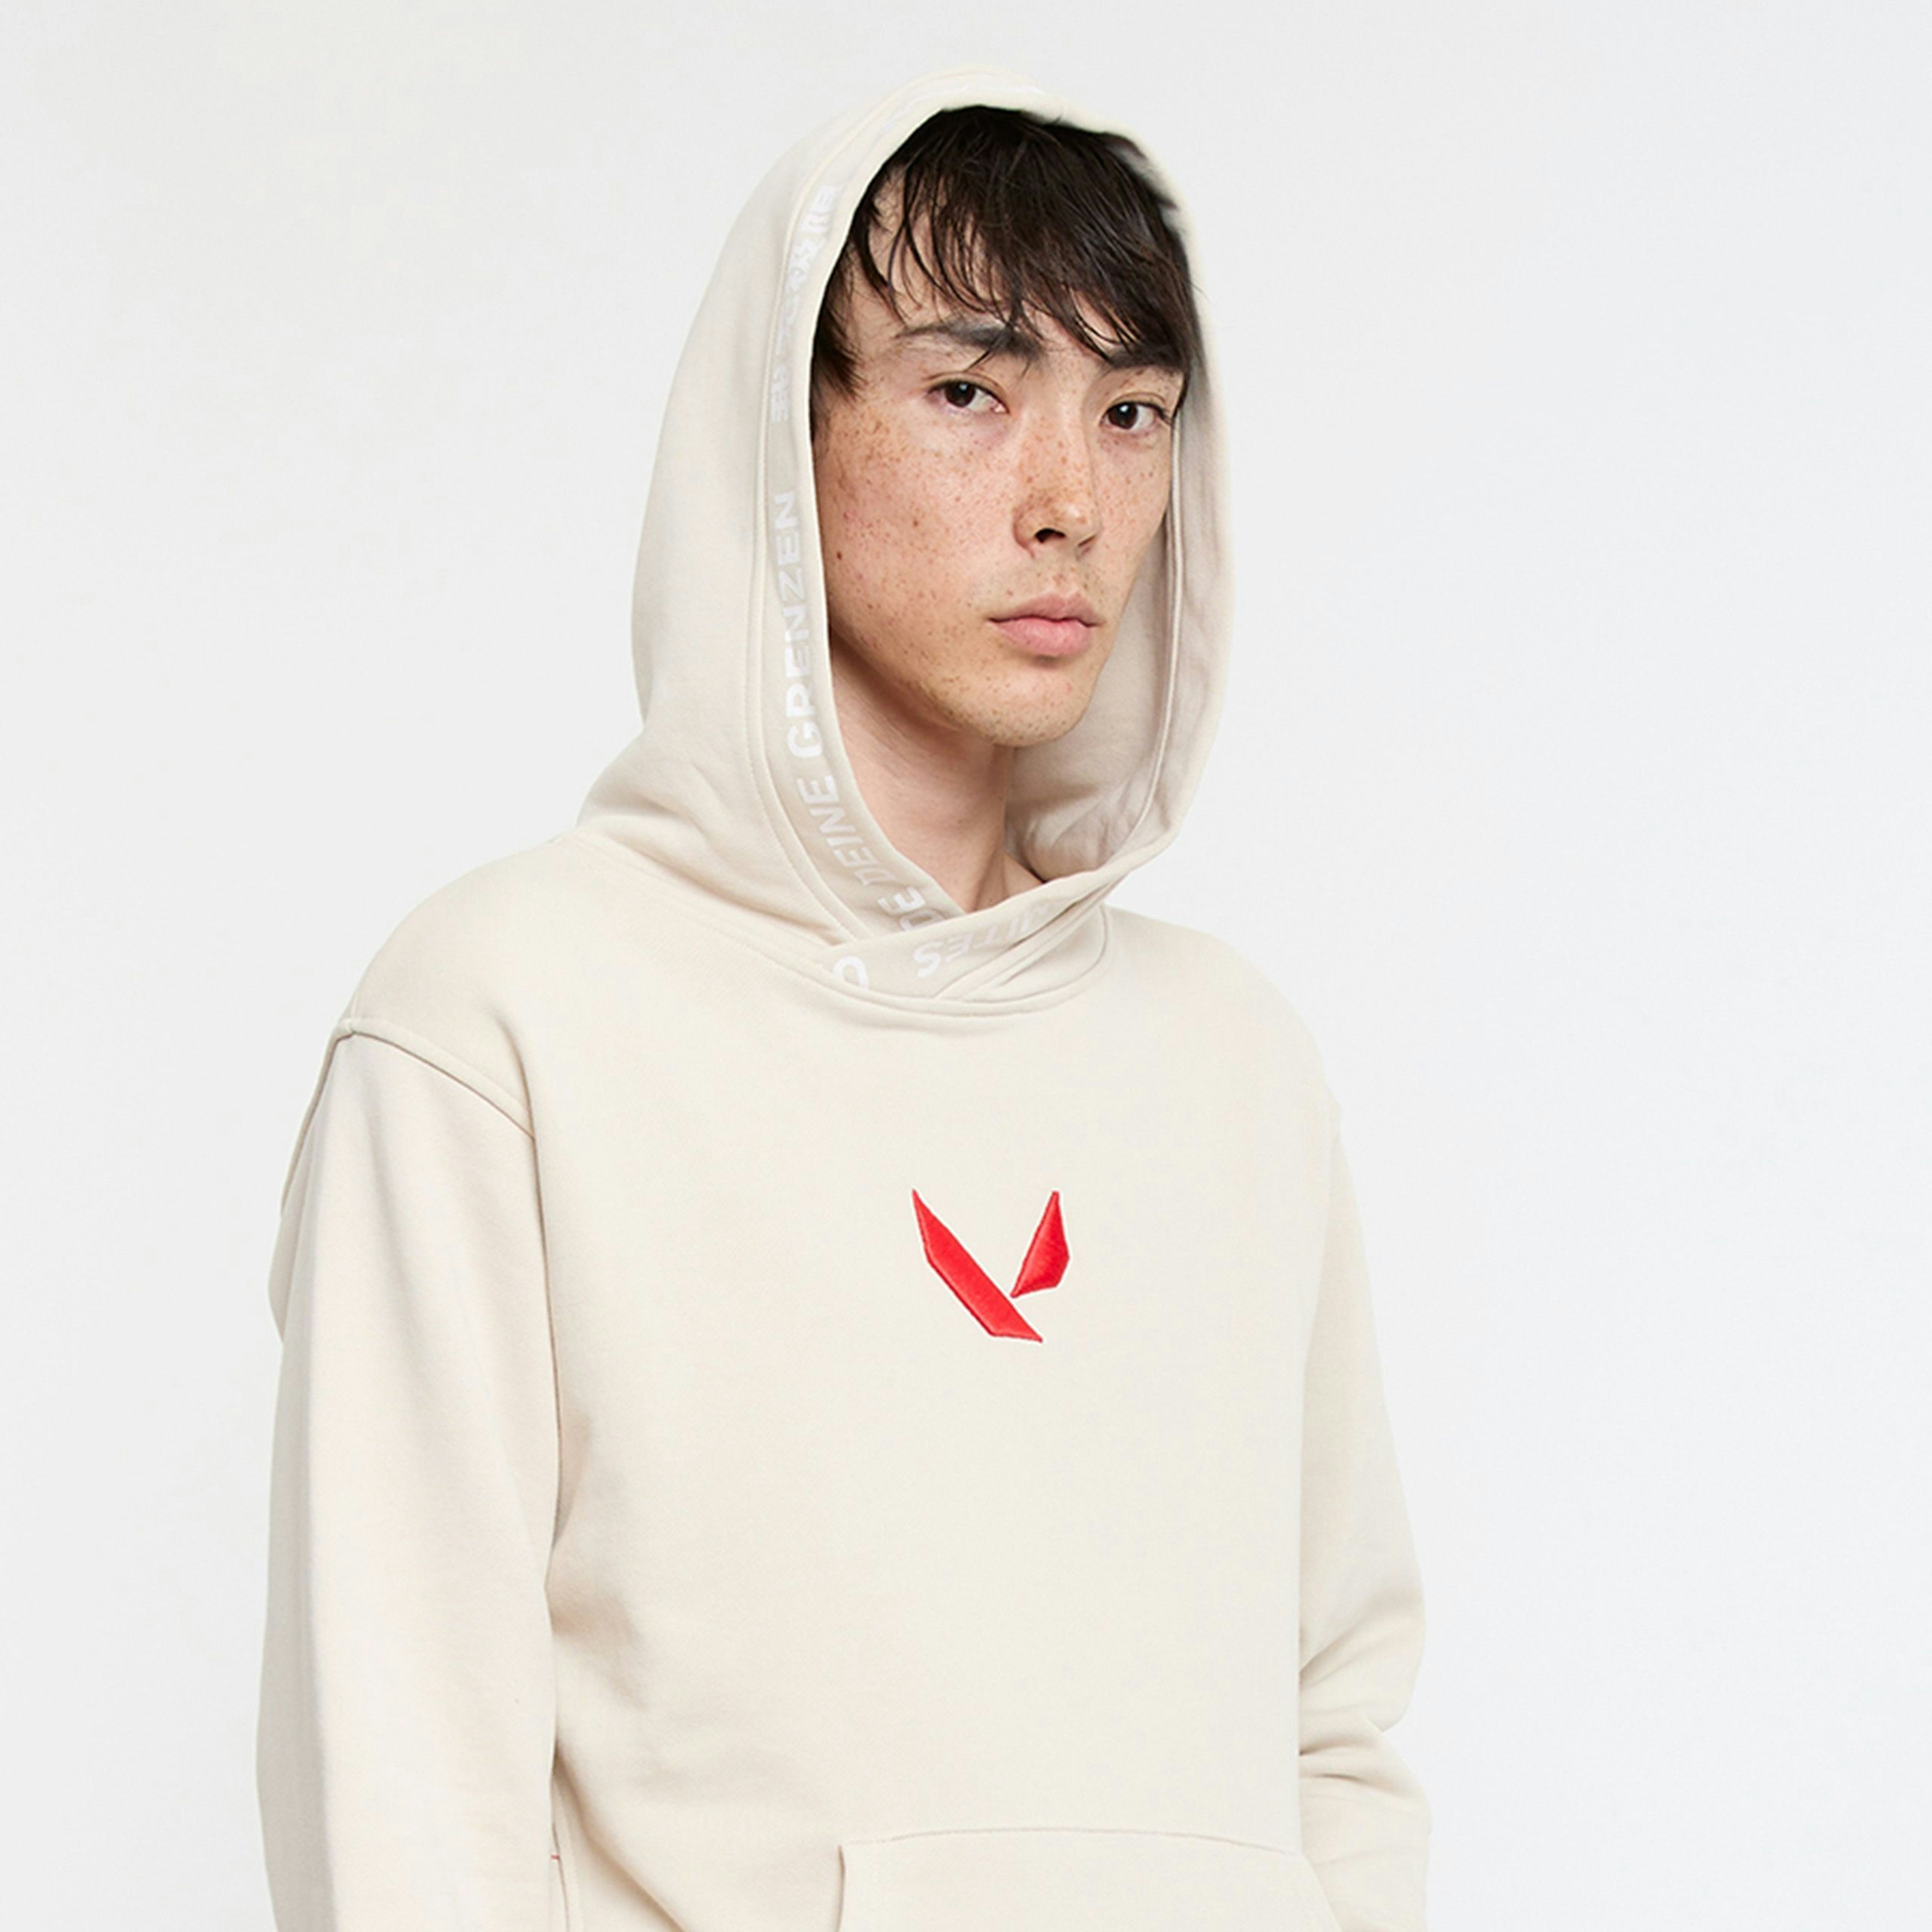 VALORANT "Defy the Limits" Hoodie